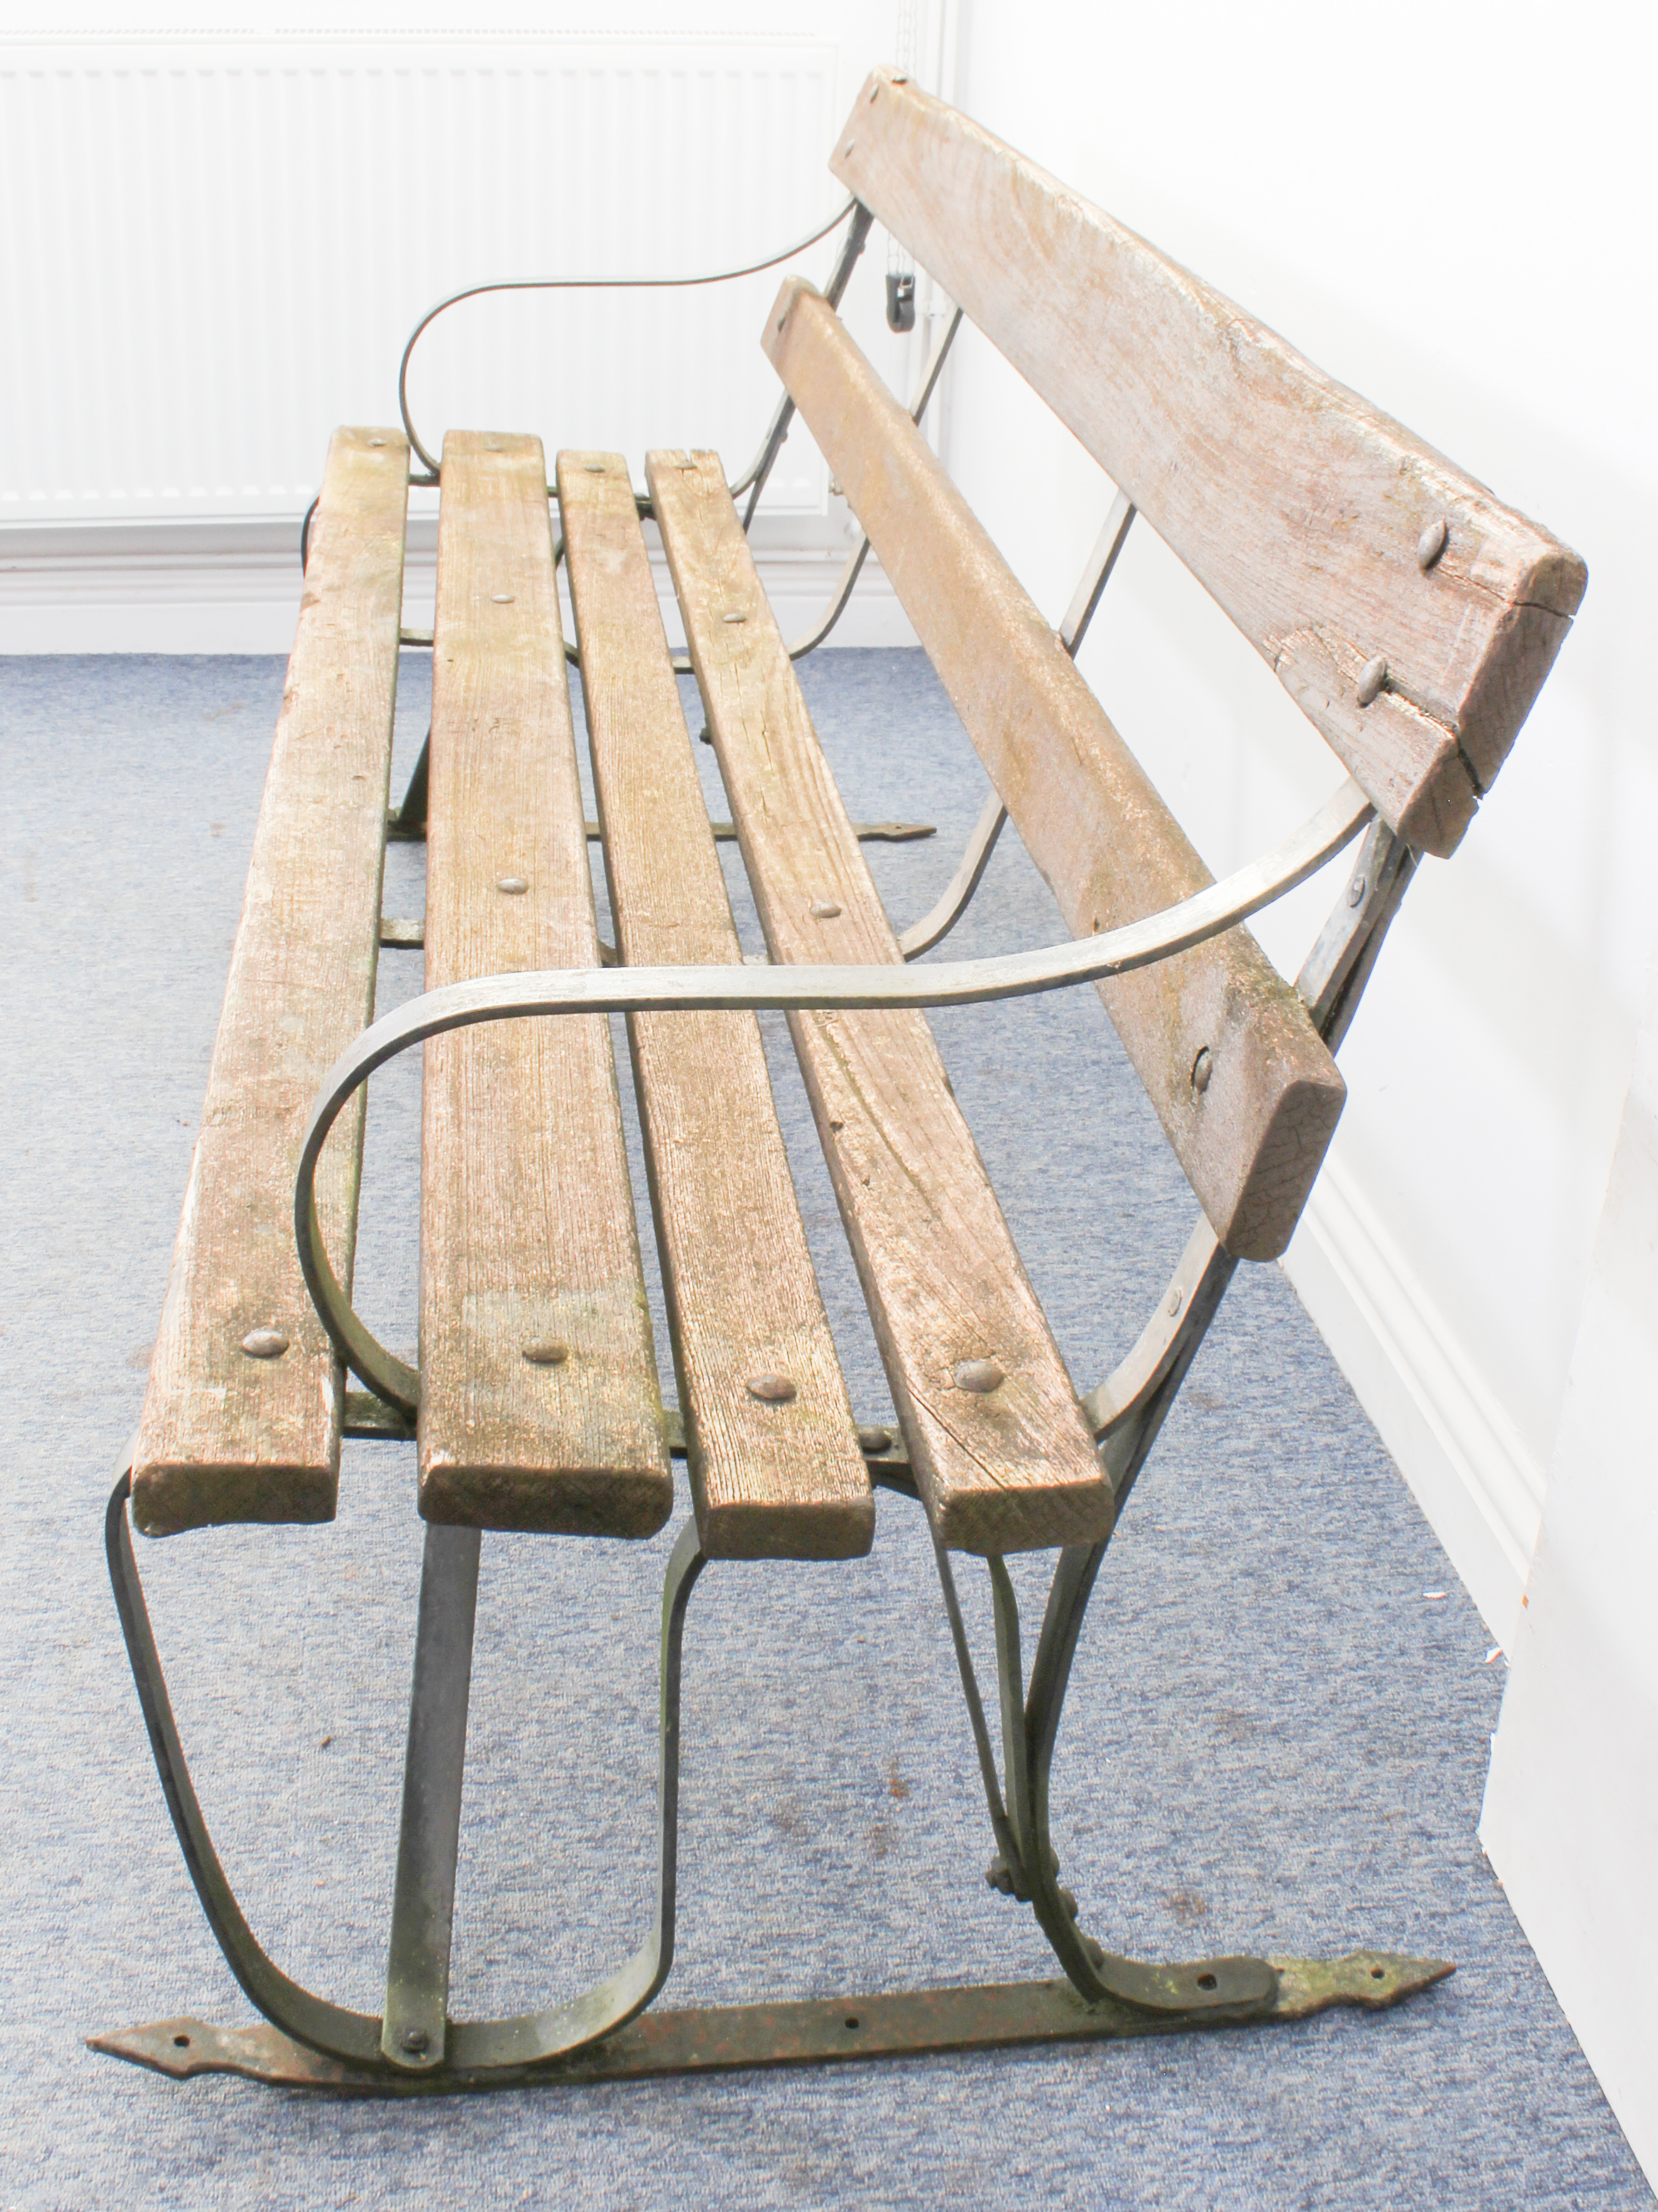 A wrought iron and hardwood slatted garden bench - 198 cm long. (similar to lot 549) - Image 3 of 3